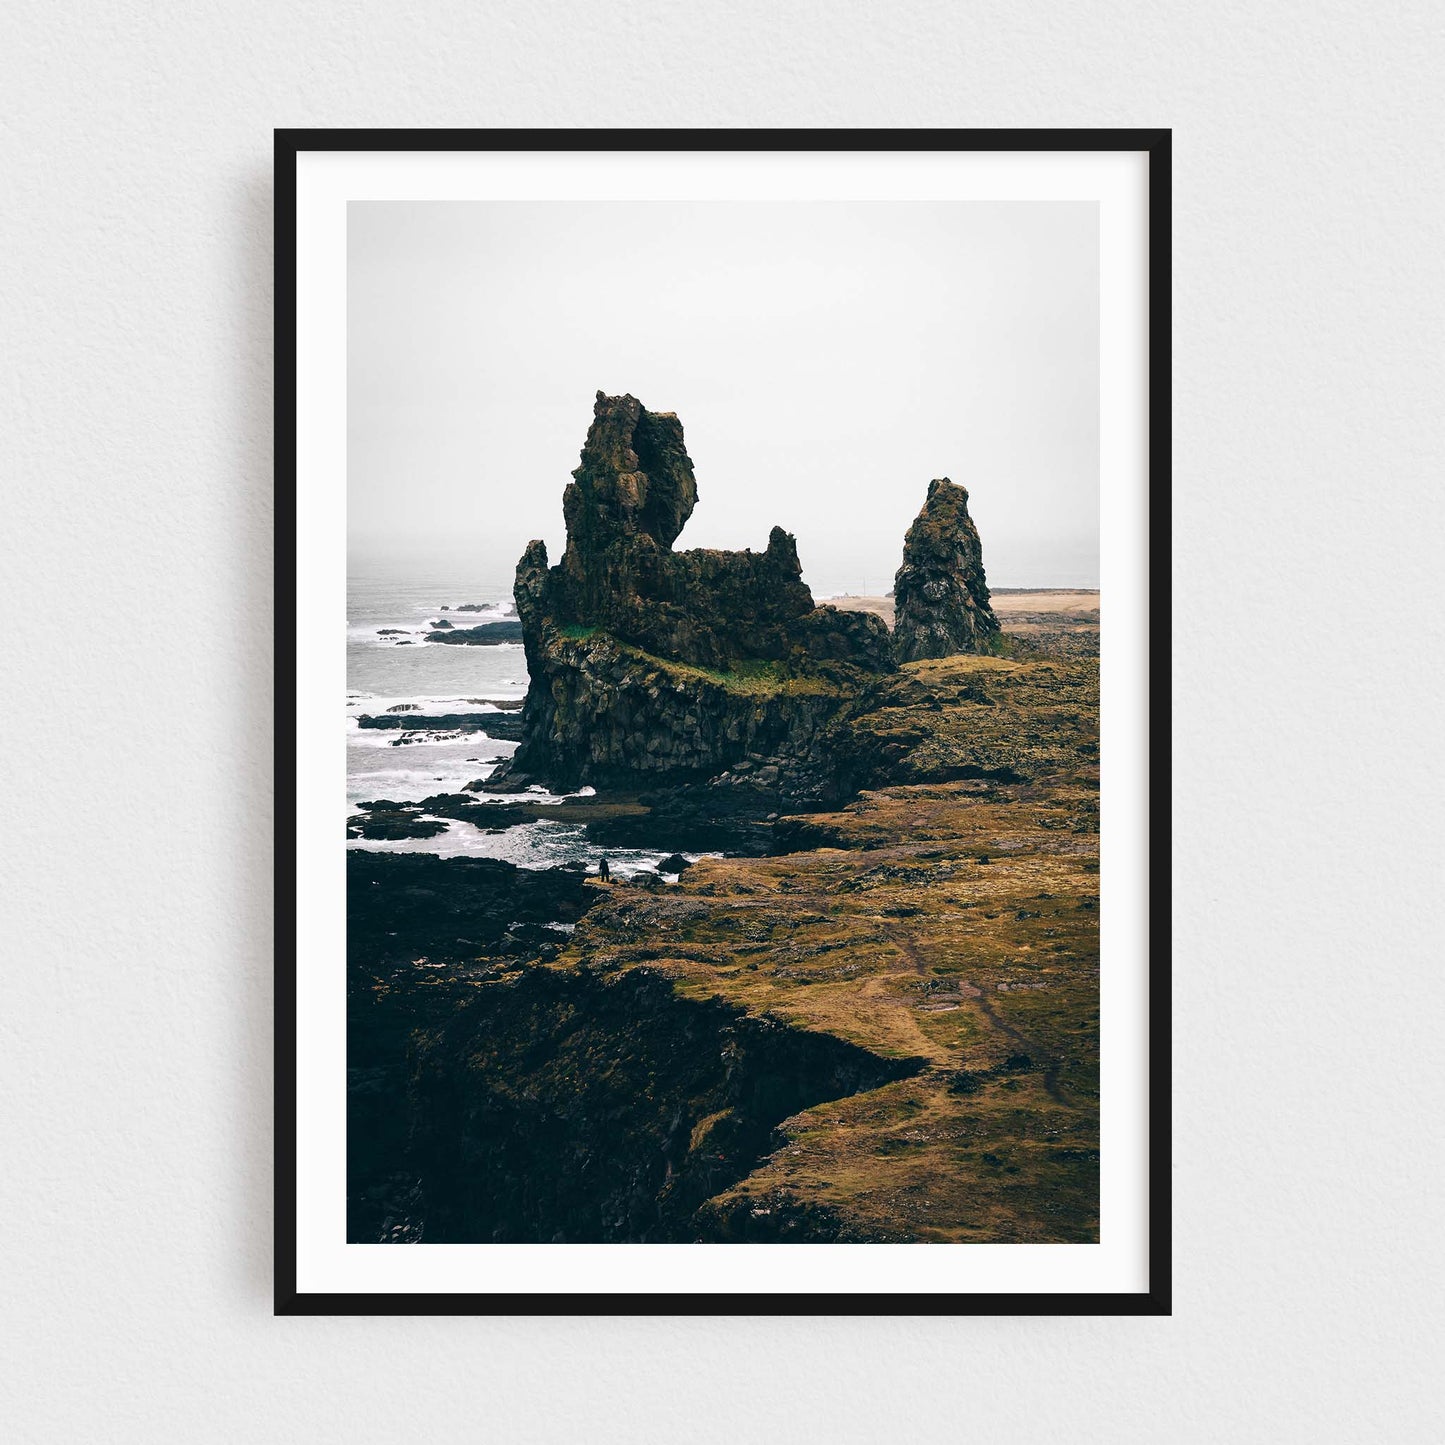 Iceland fine art photography print featuring Londrangar rock formations